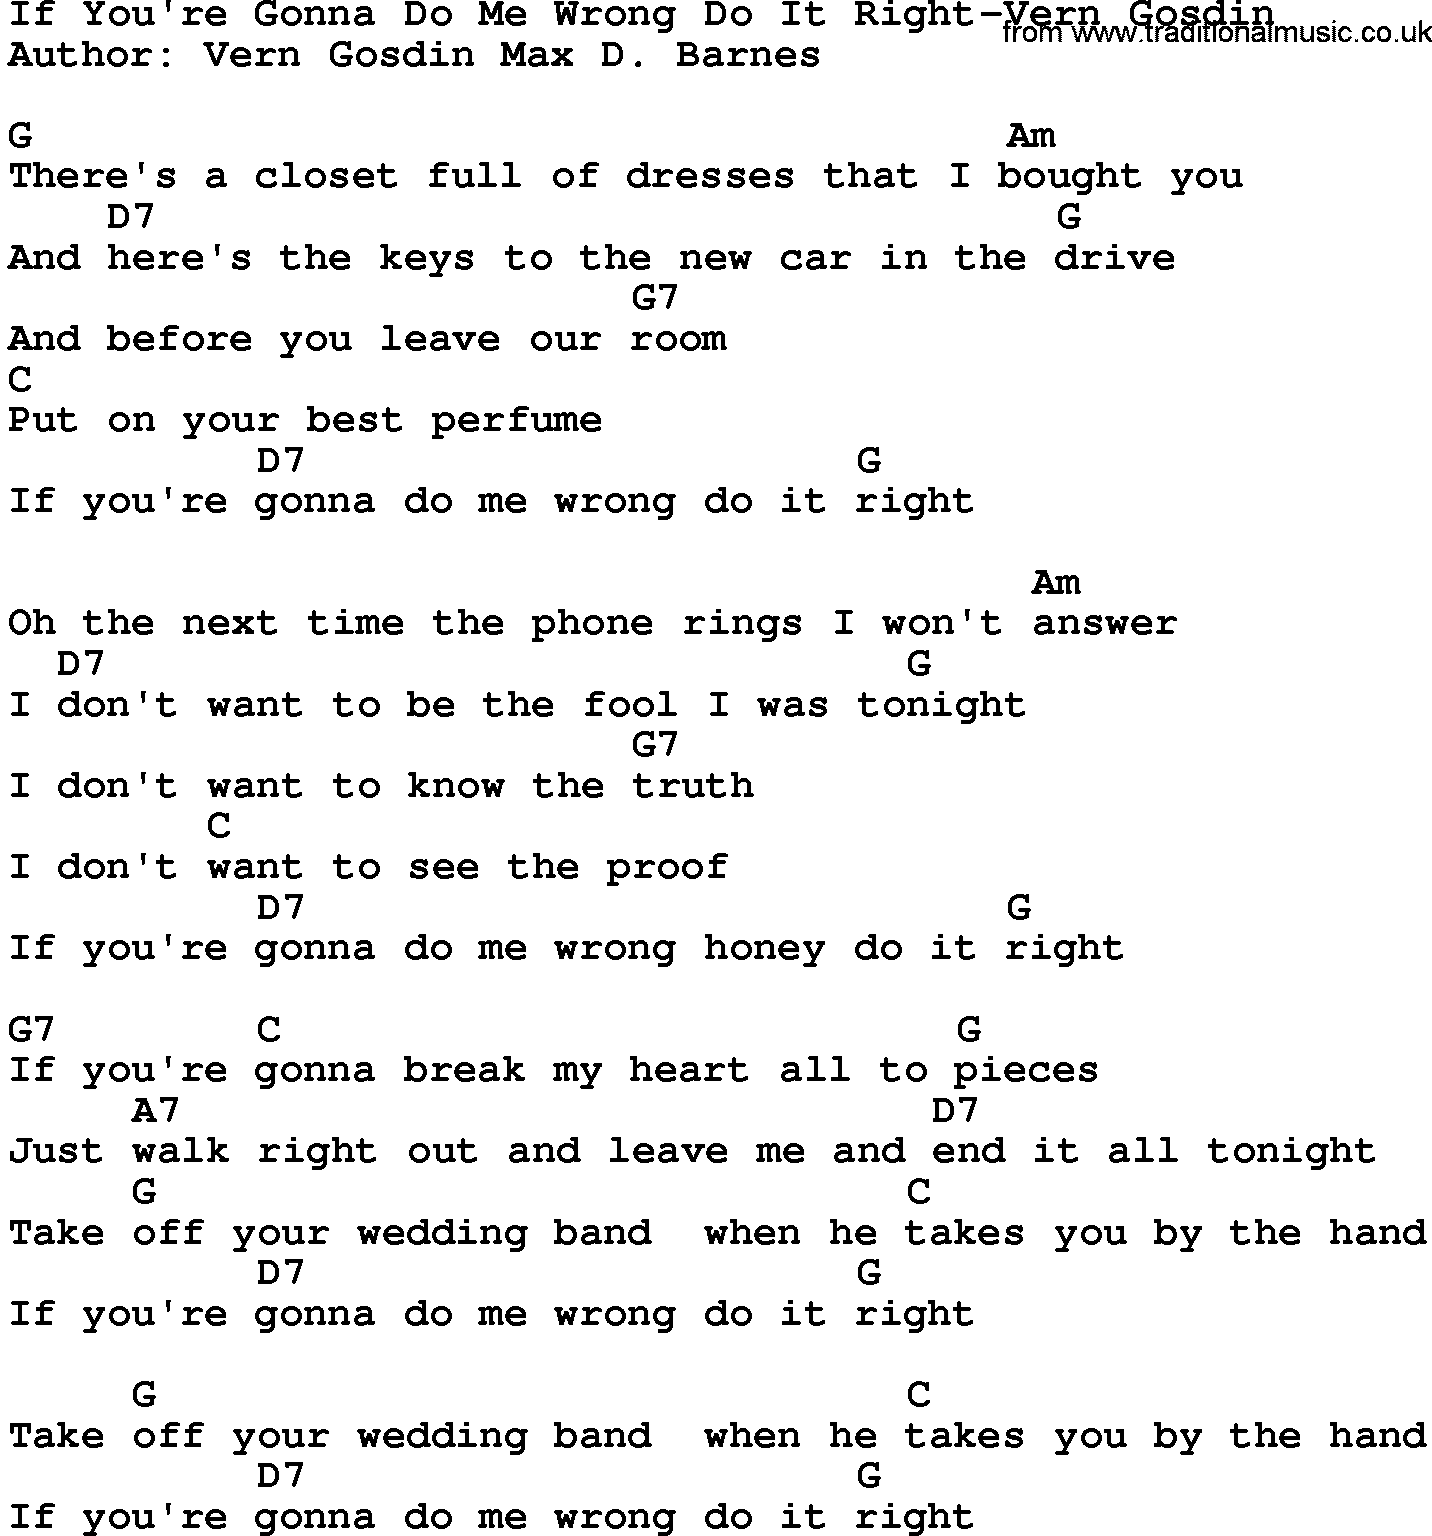 Country music song: If You're Gonna Do Me Wrong Do It Right-Vern Gosdin lyrics and chords